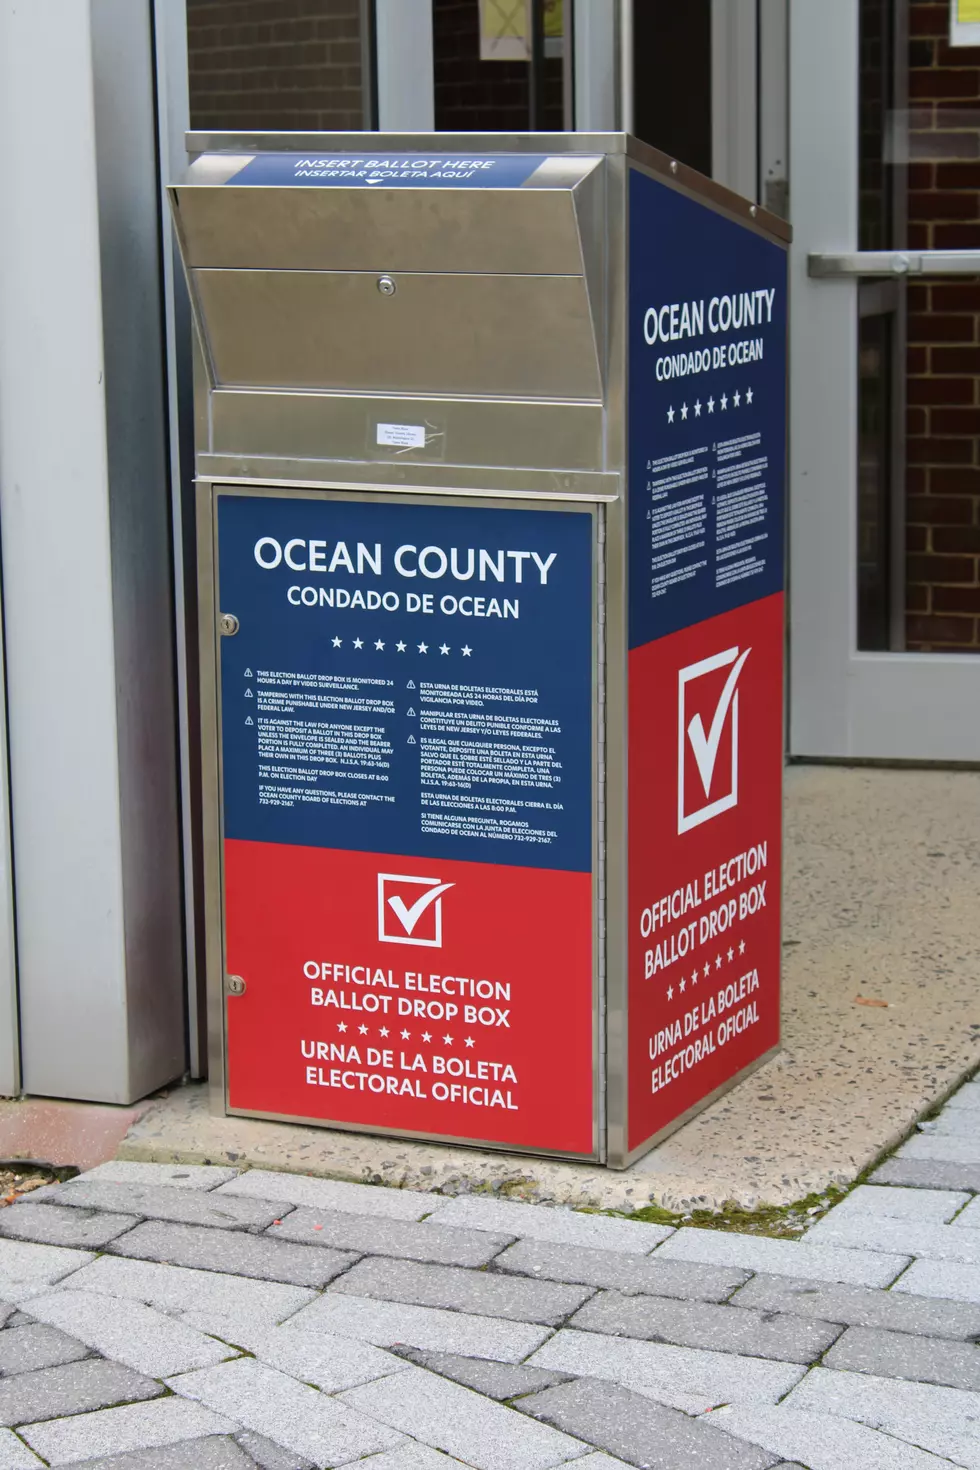 New Jersey Ballots Can Be Dropped Off At Drop Boxes Until 8 Tonight